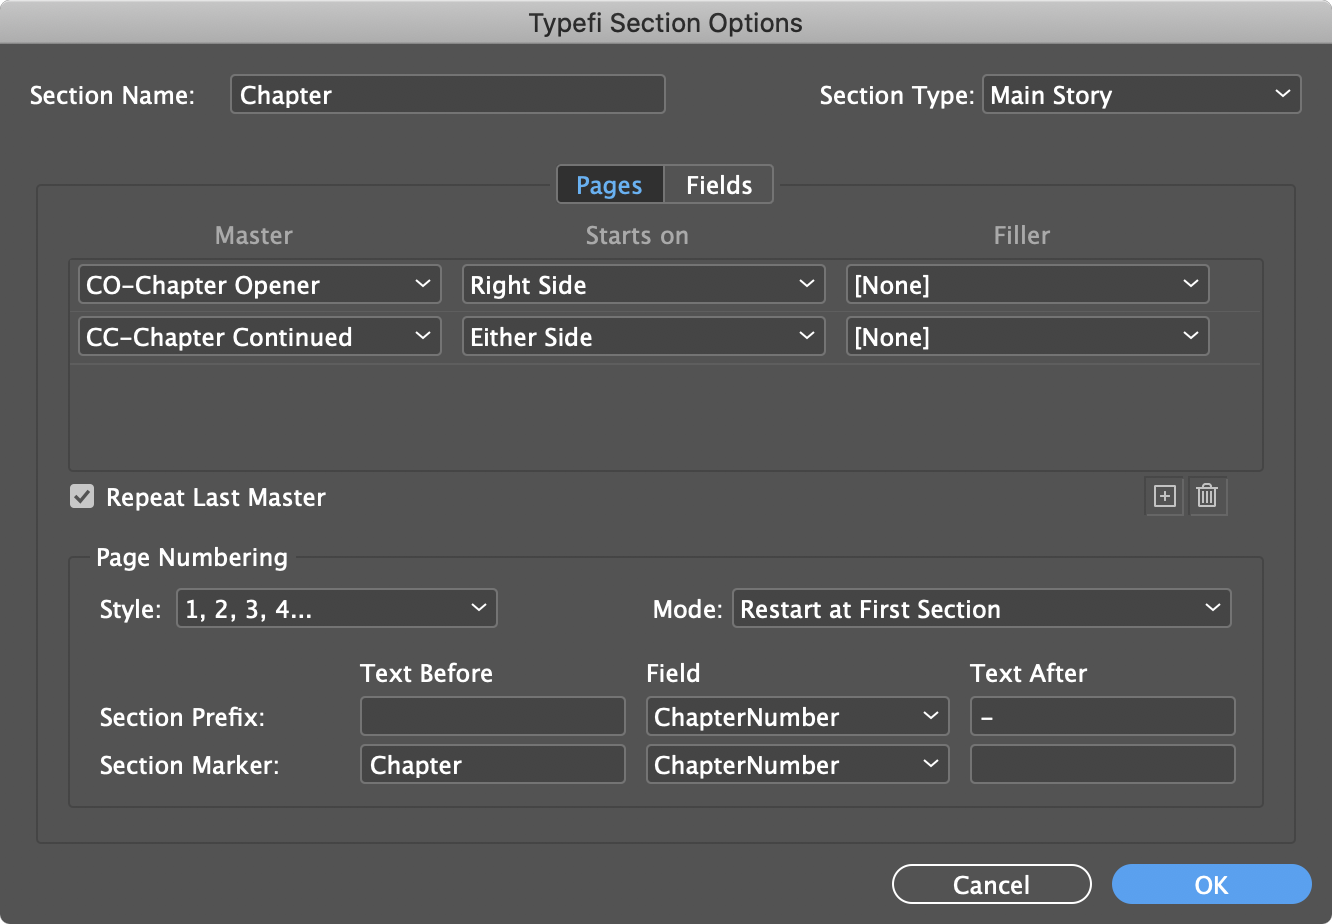 The Section Marker for the Section Chapter has been configured to insert the text Chapter 